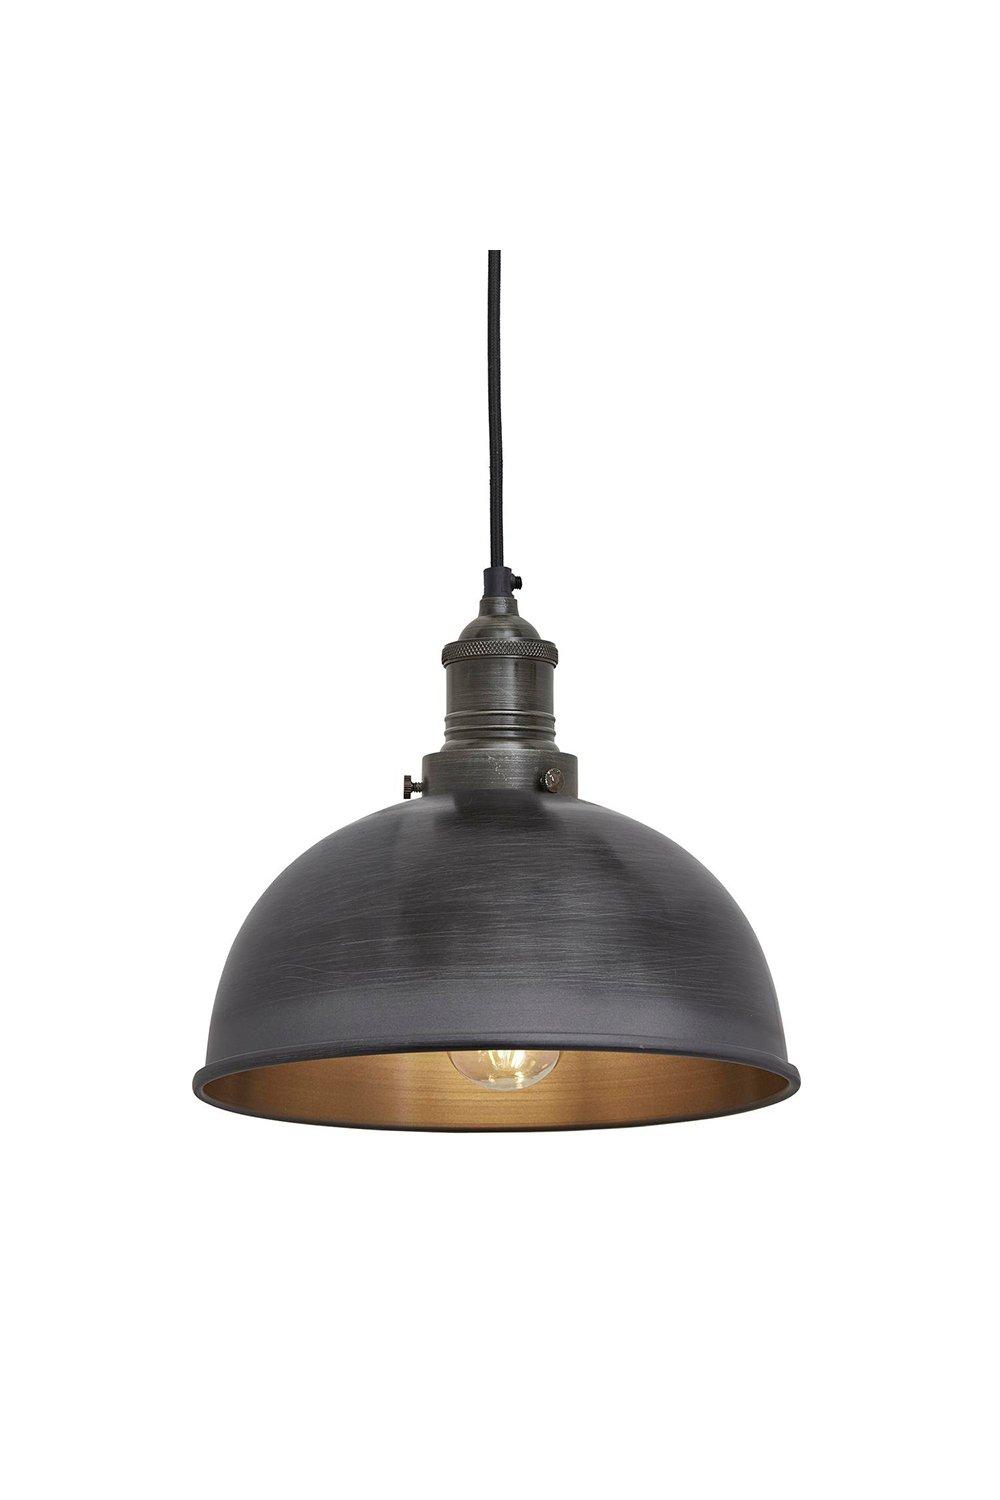 Brooklyn Dome Pendant, 8 Inch, Pewter, Pewter Holder